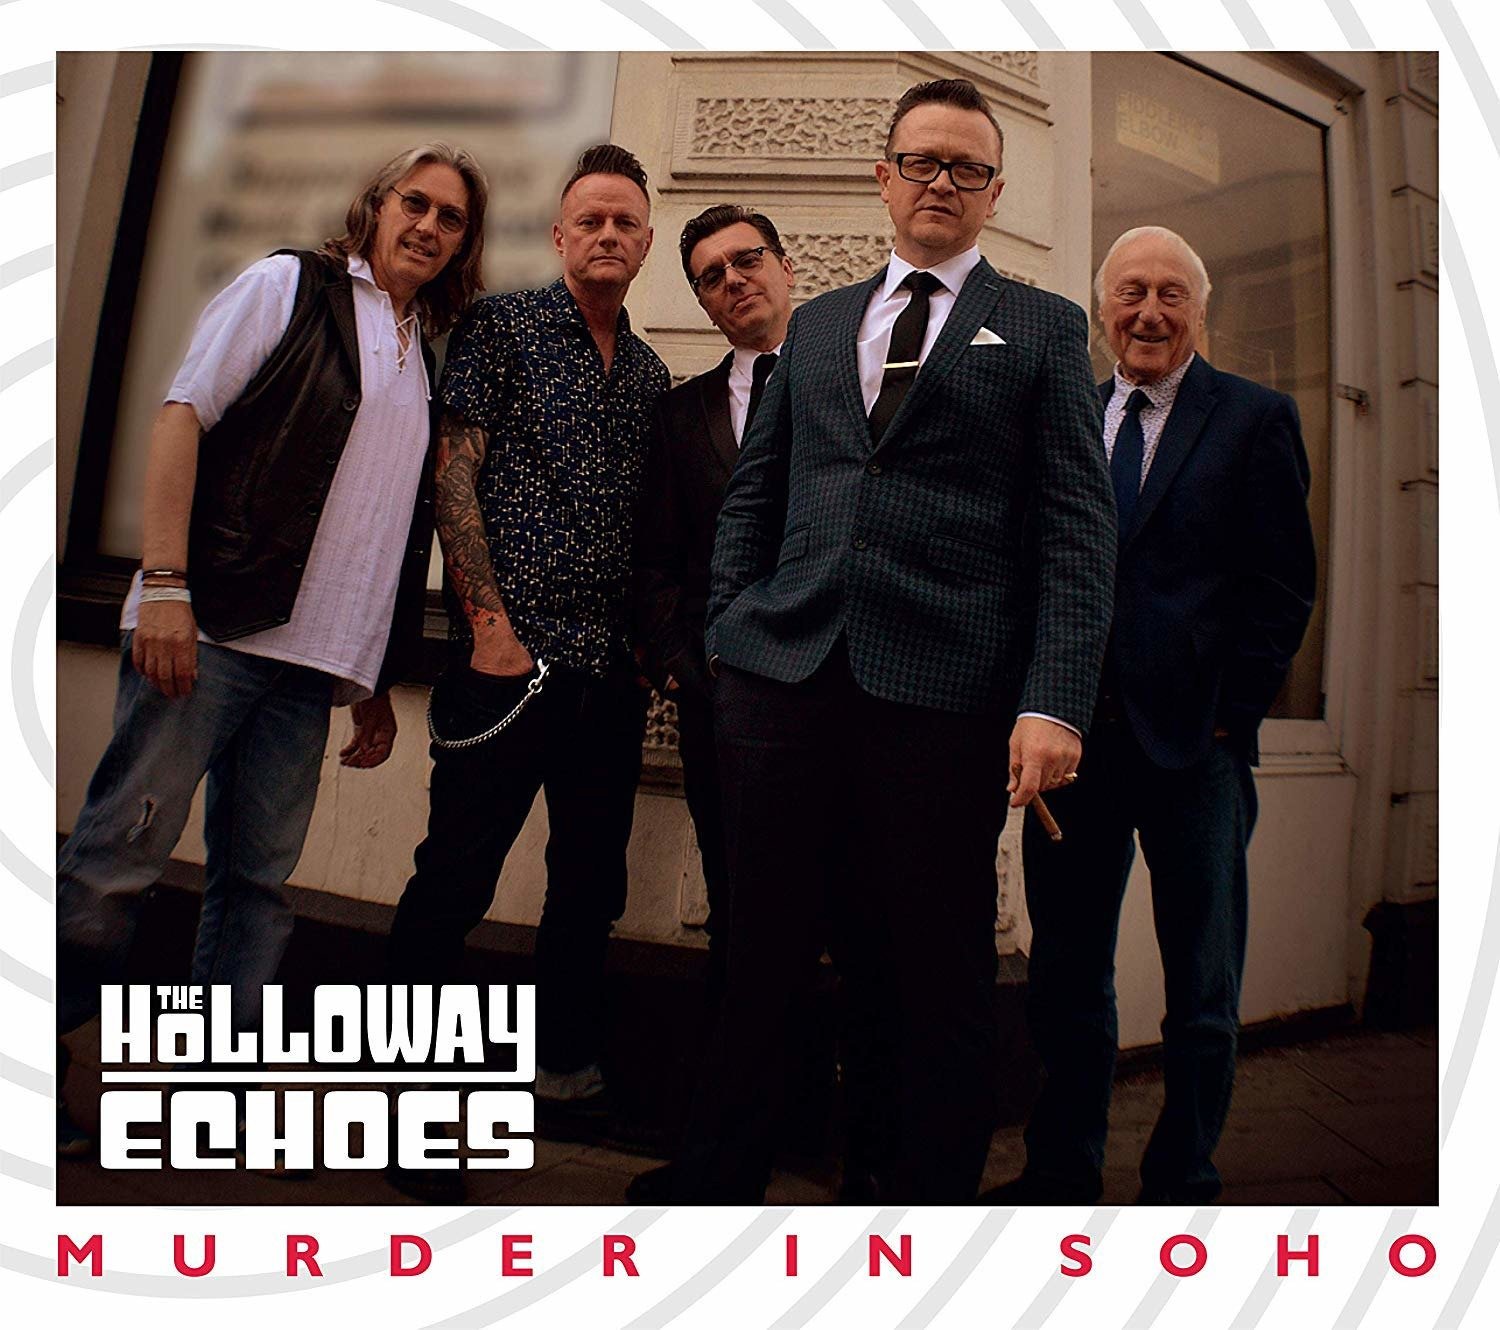 CD Shop - HOLLOWAY ECHOES MURDER IN SOHO